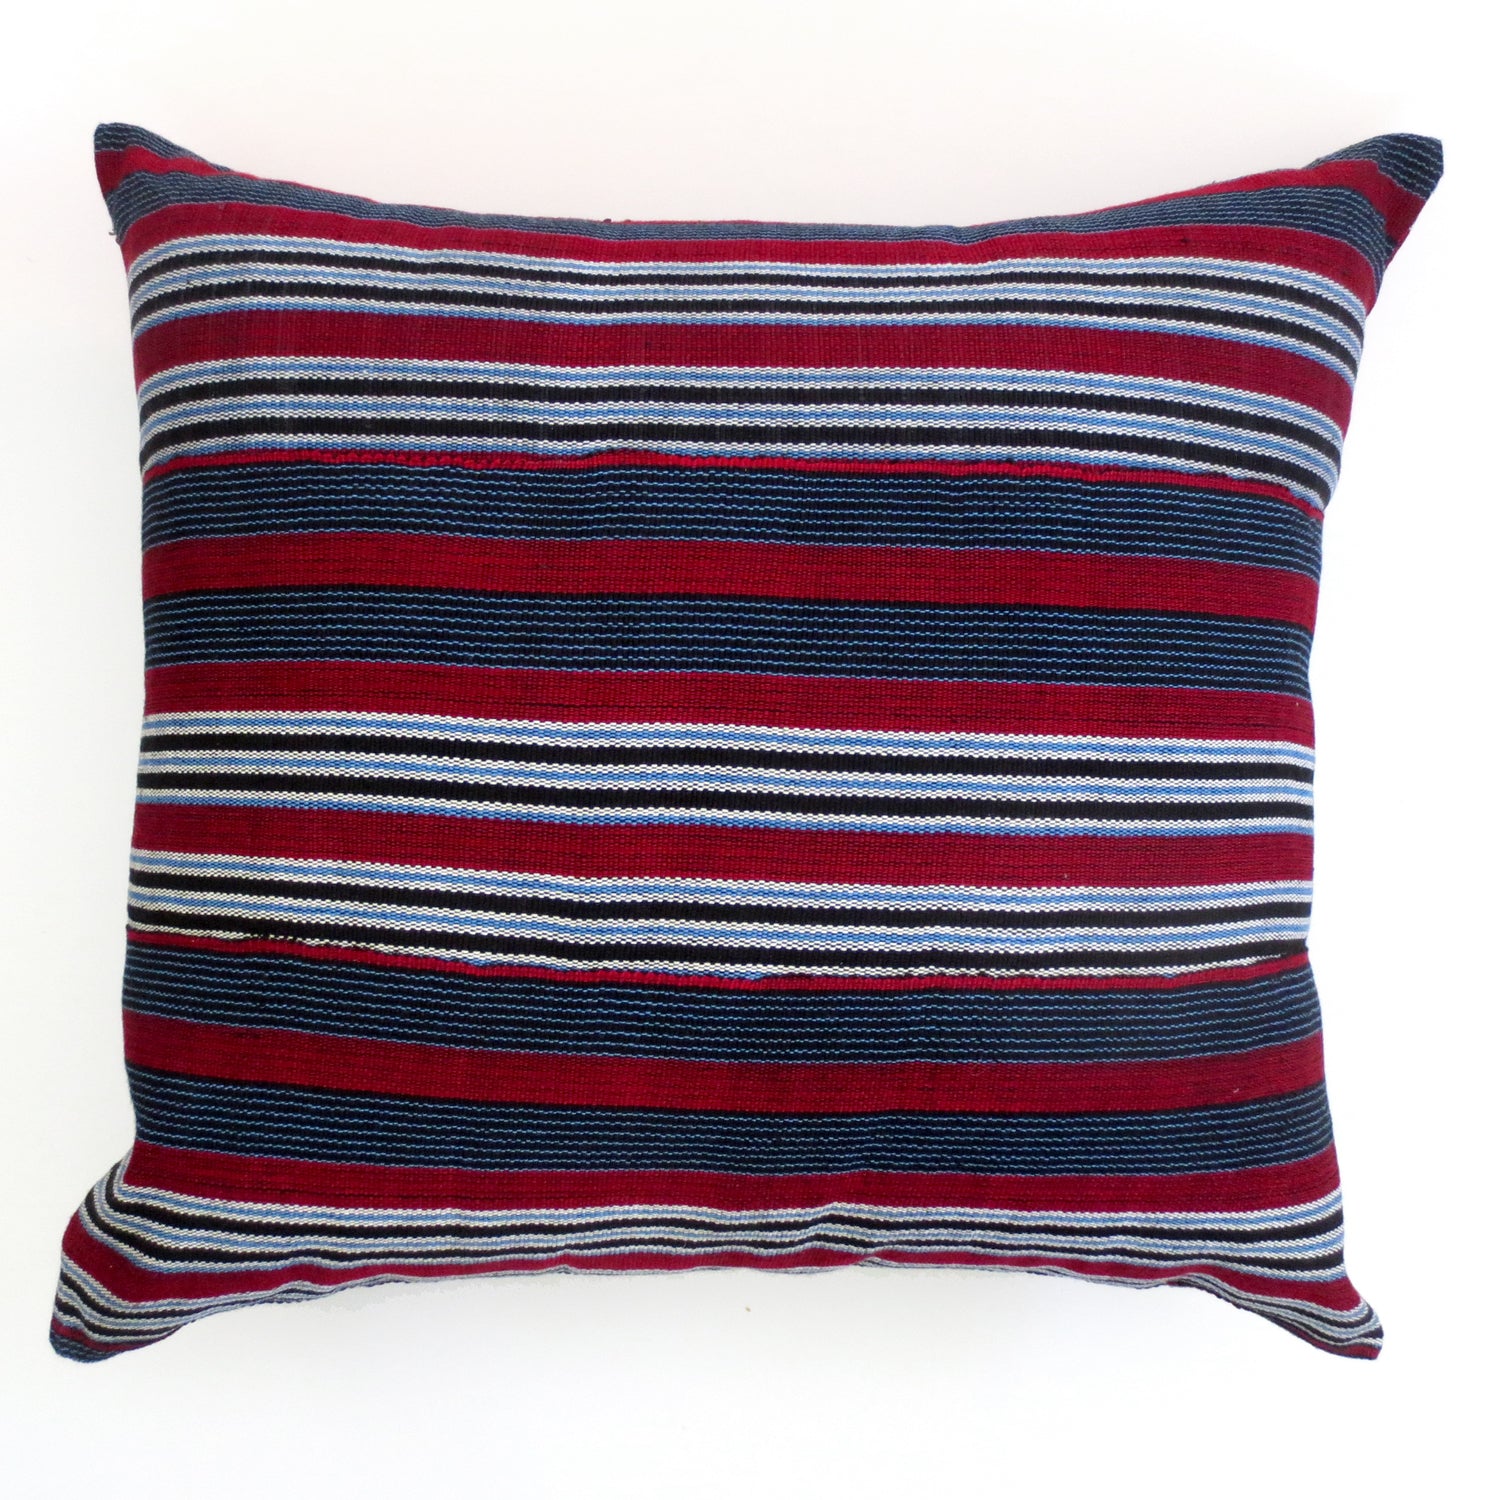 20"x20" striped pillow cover. Gray, navy and red tones.